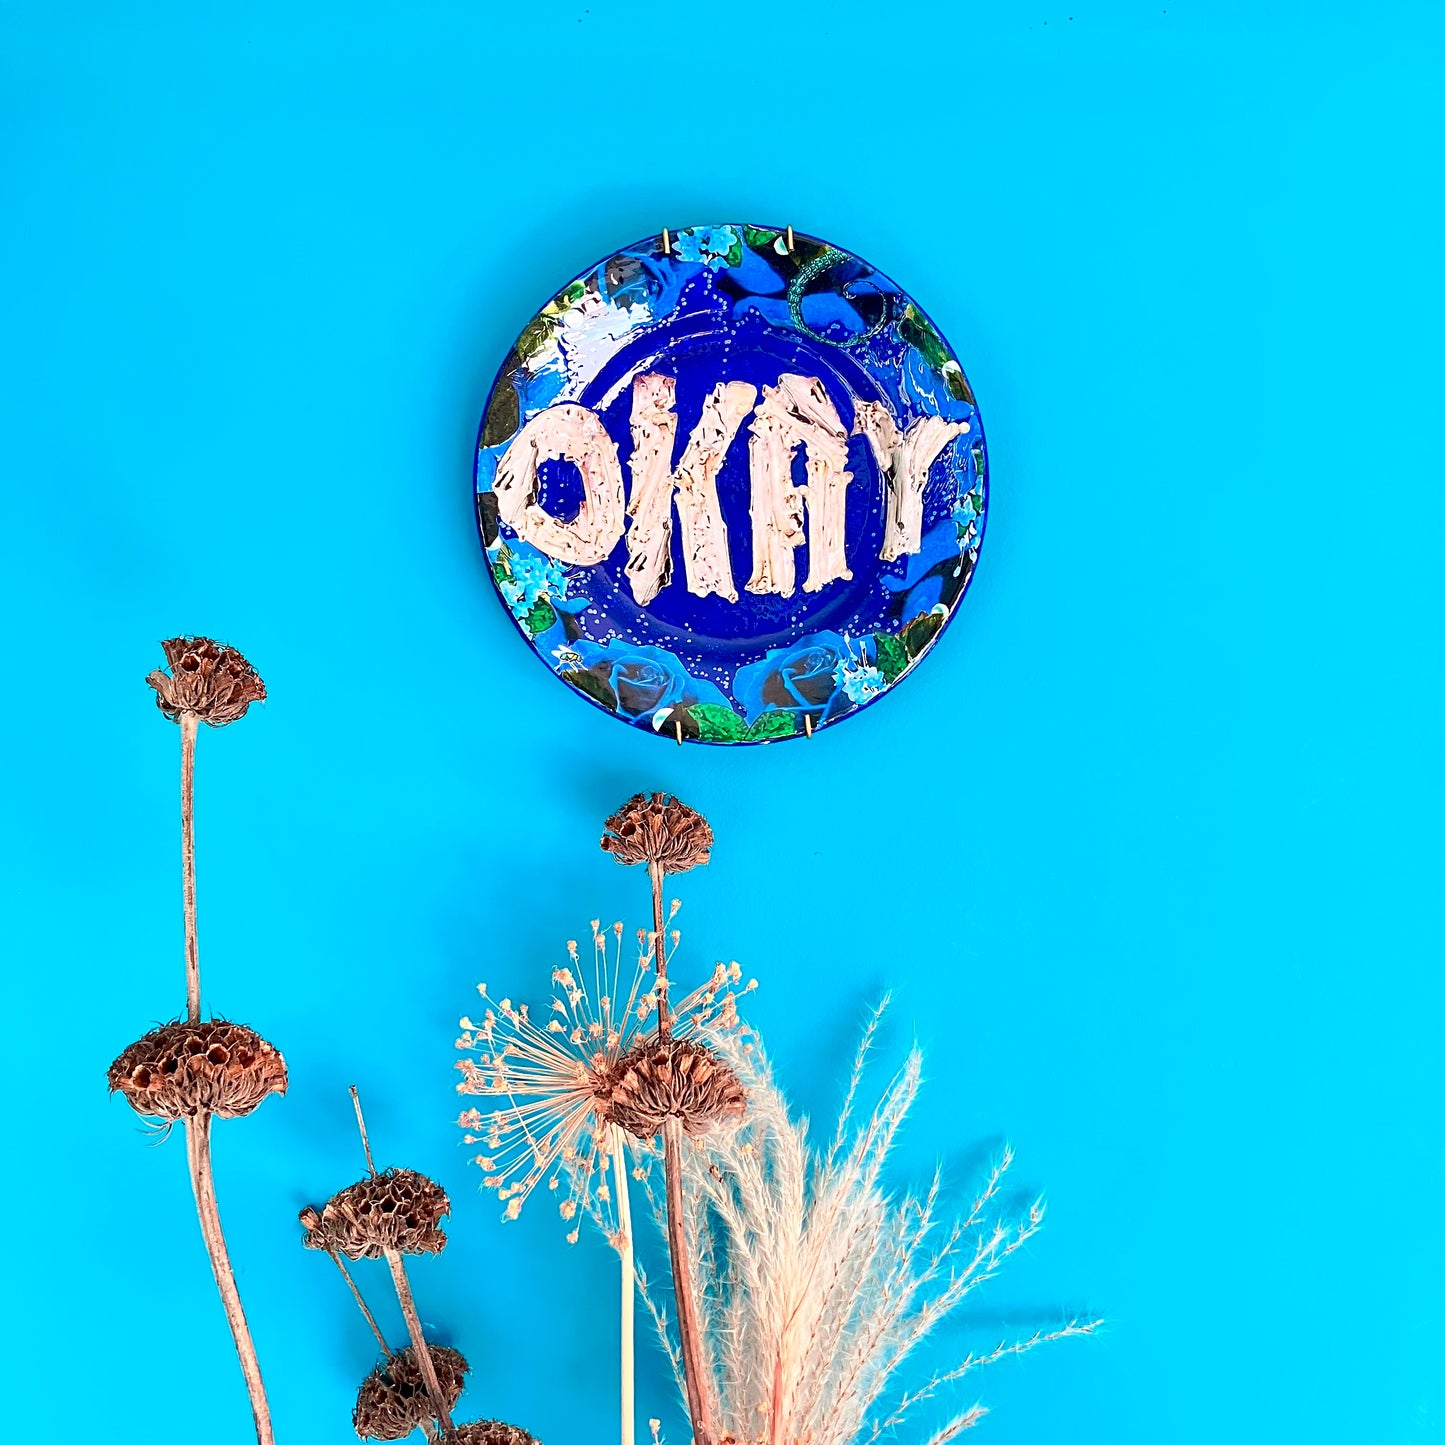 House of Frisson's "Okay" Wall Plate one-of-a-kind collage artwork on up-cycled plate. Plate hanging on a blue wall.